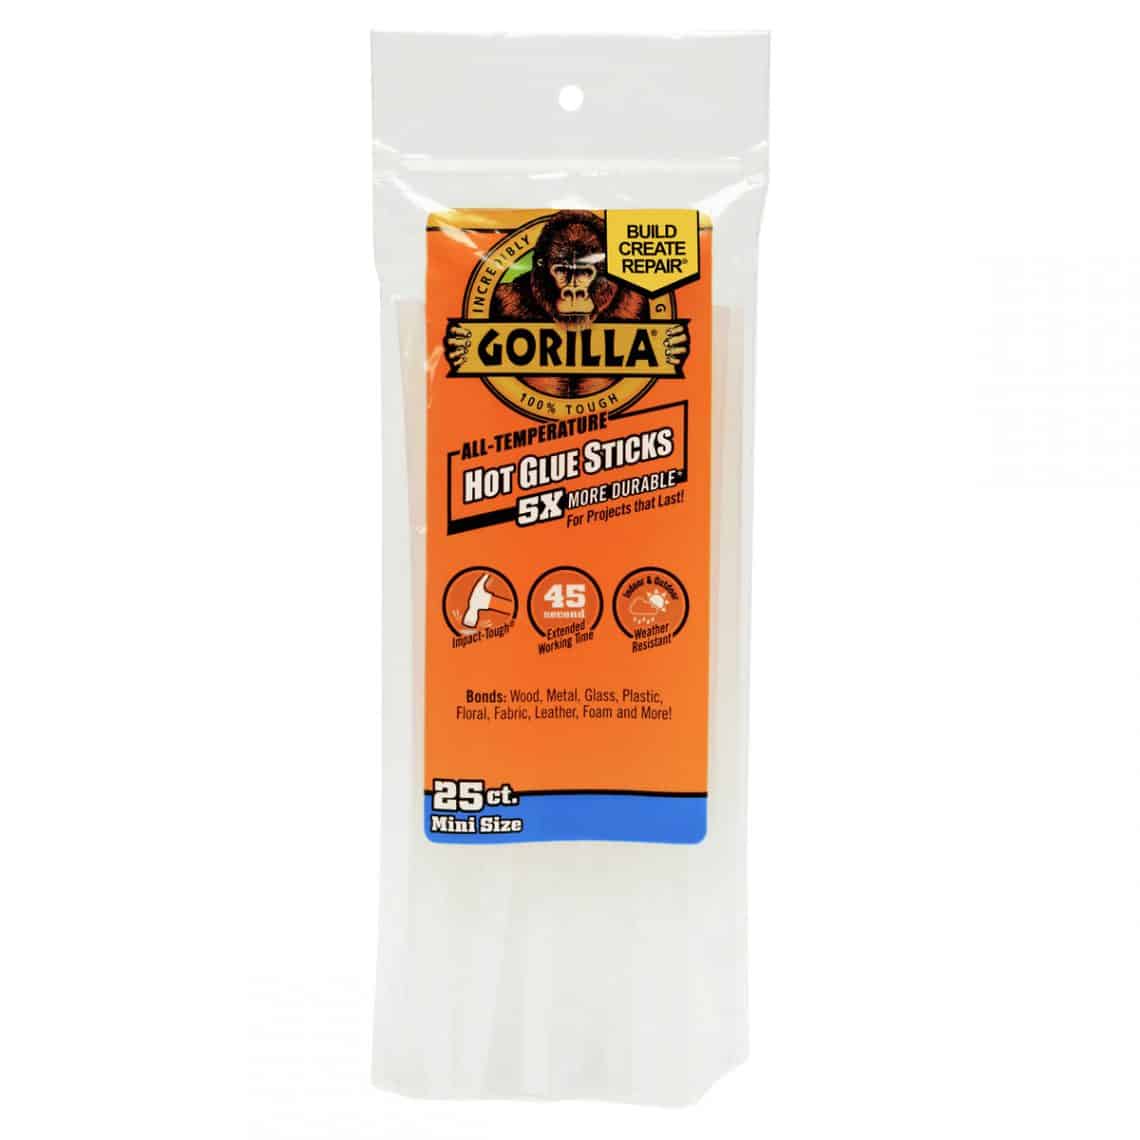 GORILLA ALL-TEMPERATURE HOT GLUE STICKS - MINI SIZE IN 8 OR 4 -  Northwoods Wholesale Outlet